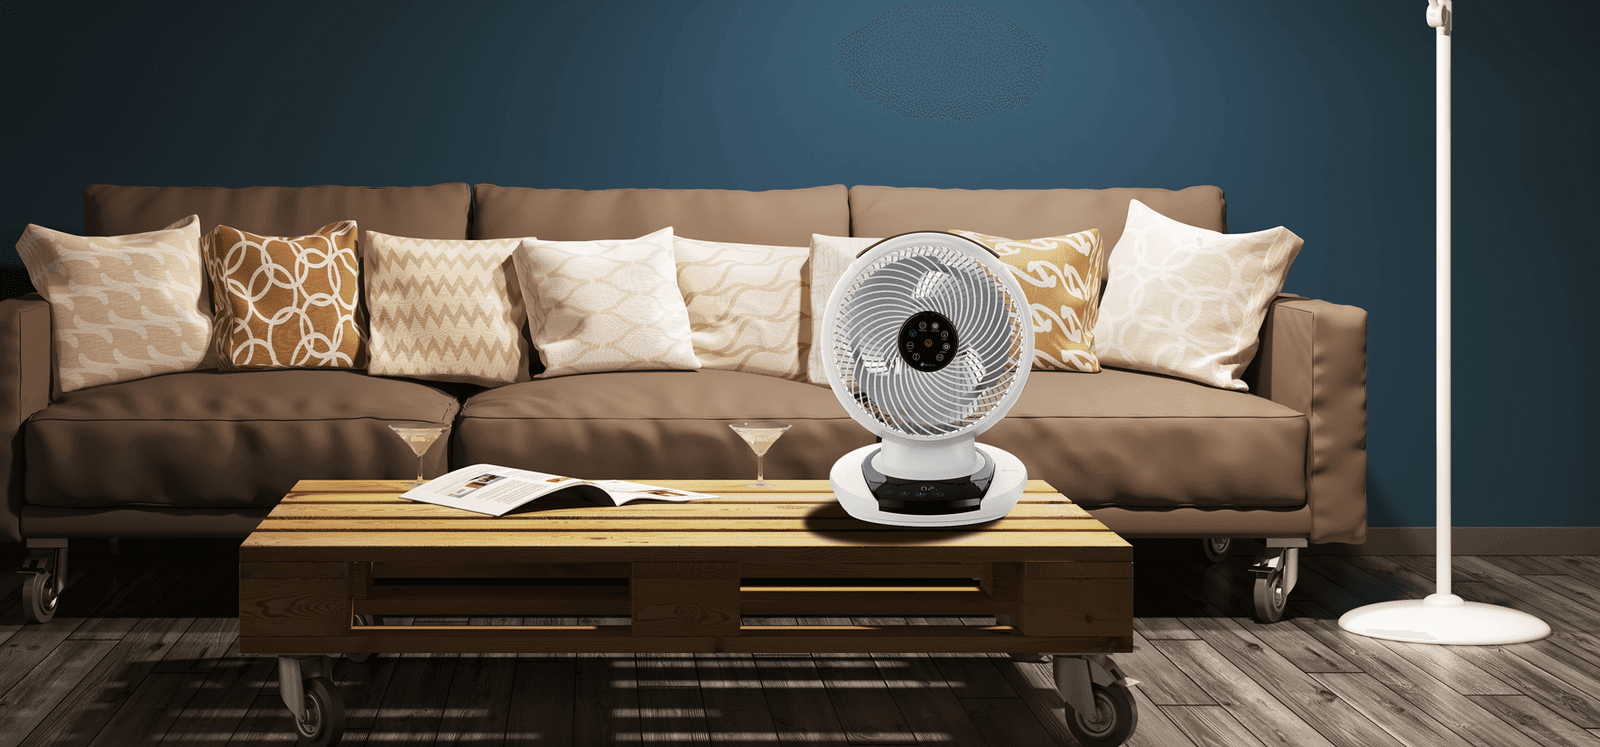 Revolutionize Your Room Cooling with MeacoFan 1056 Air Circulator